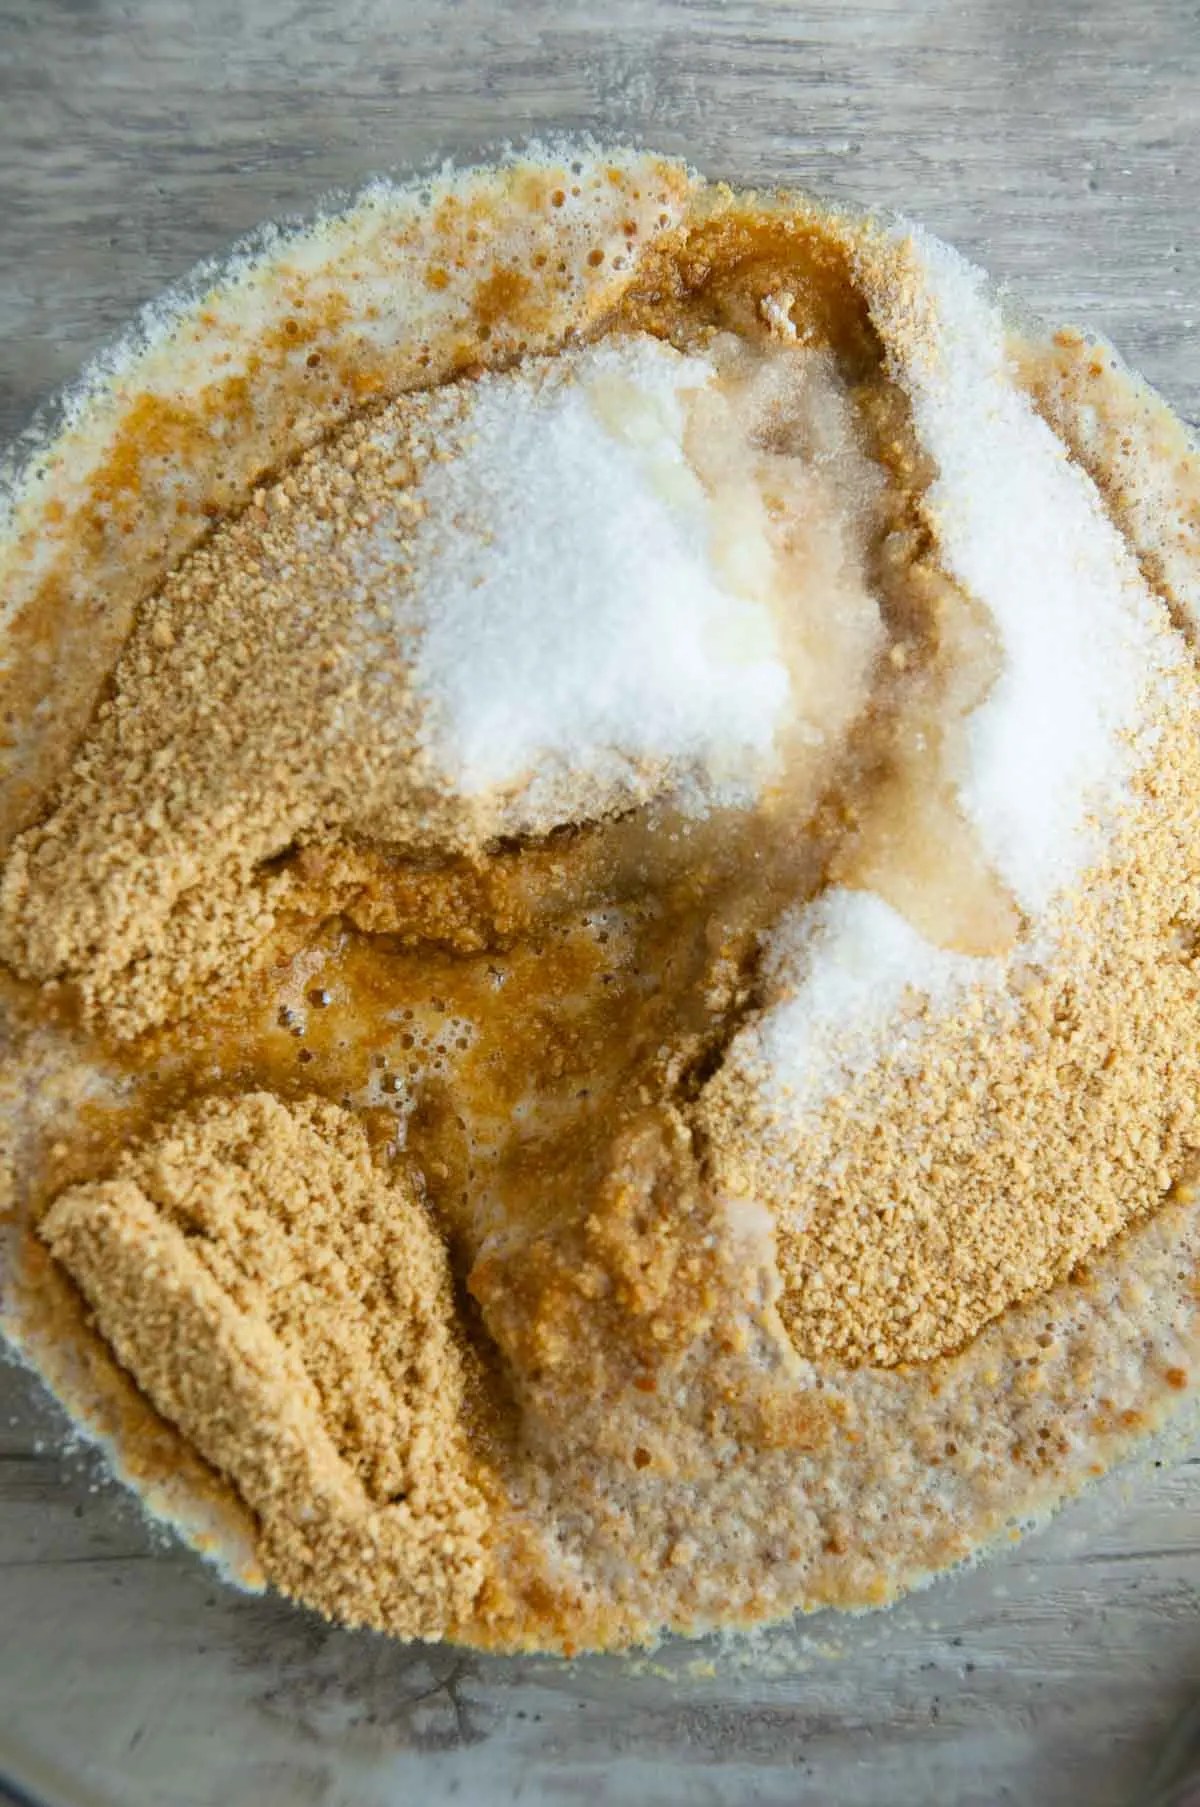 Add the ingredients for graham cracker crust to the bowl of a food processor